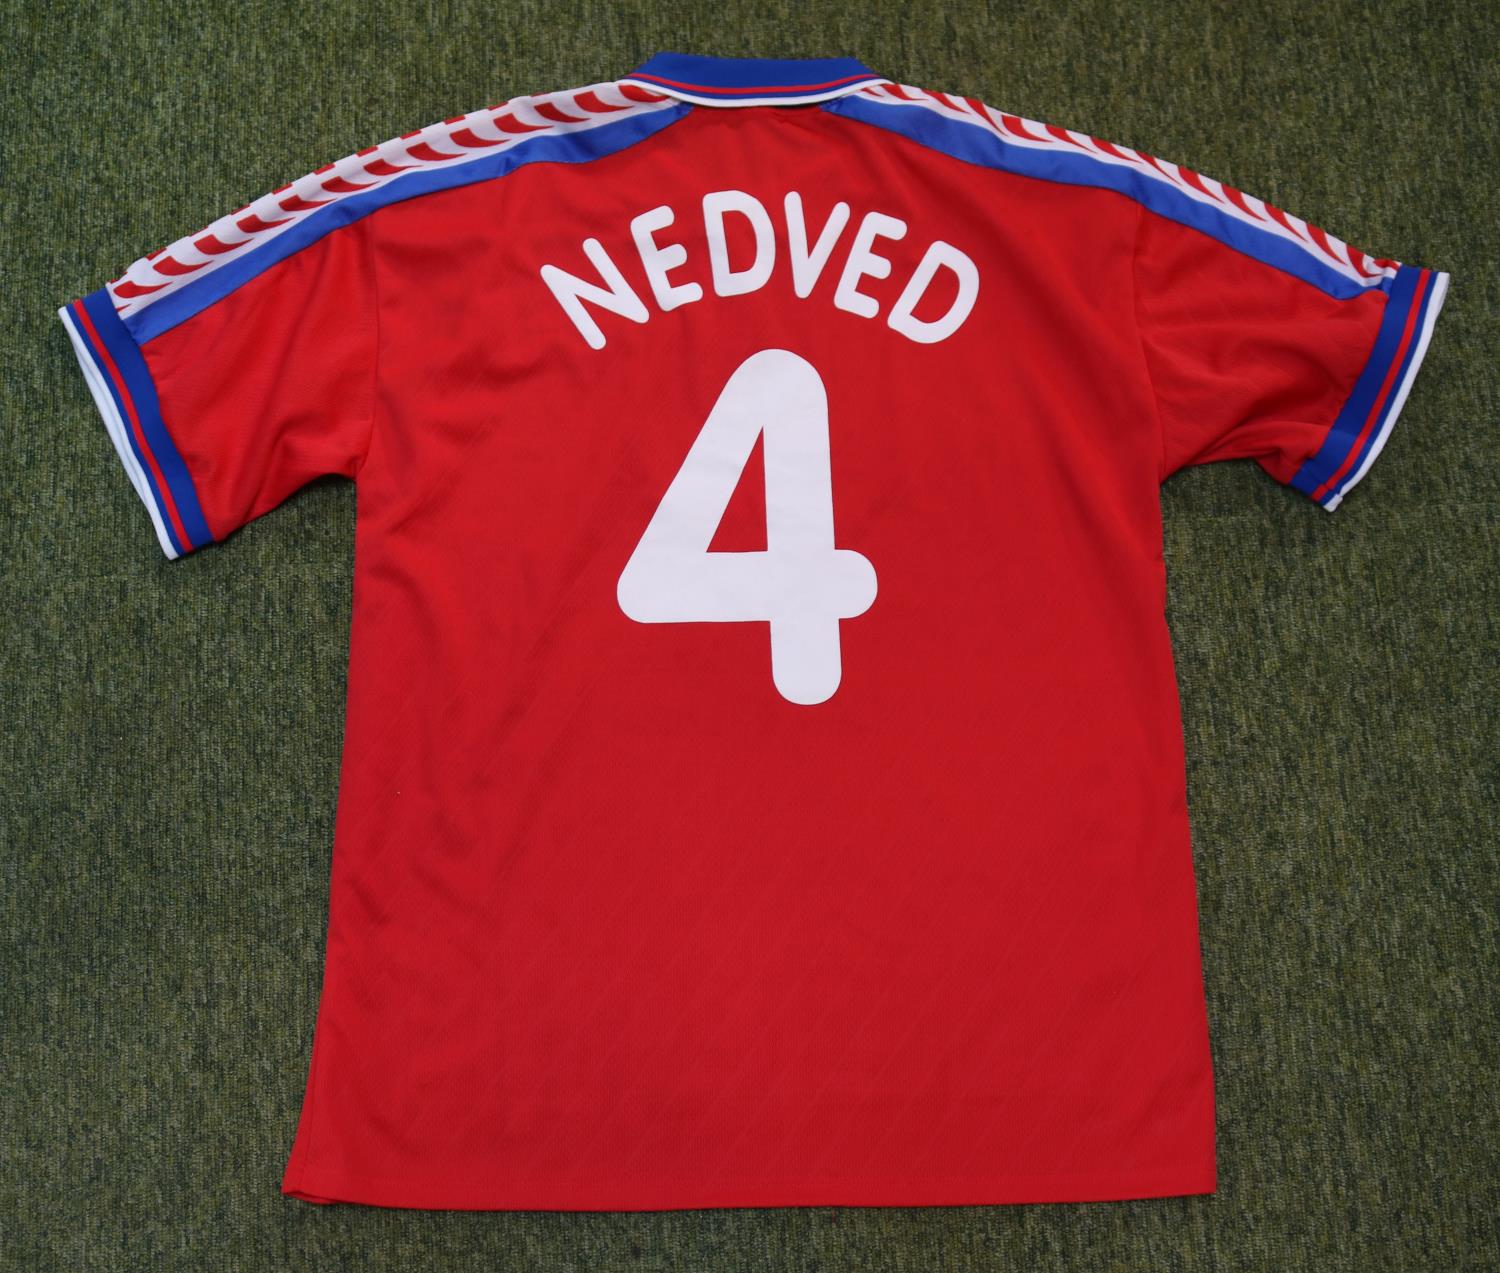 PAVEL NEDVED 1996 MATCH WORN CZECH REPUBLIC JERSEY The Puma red #4 jersey was worn by the Czech - Image 6 of 7